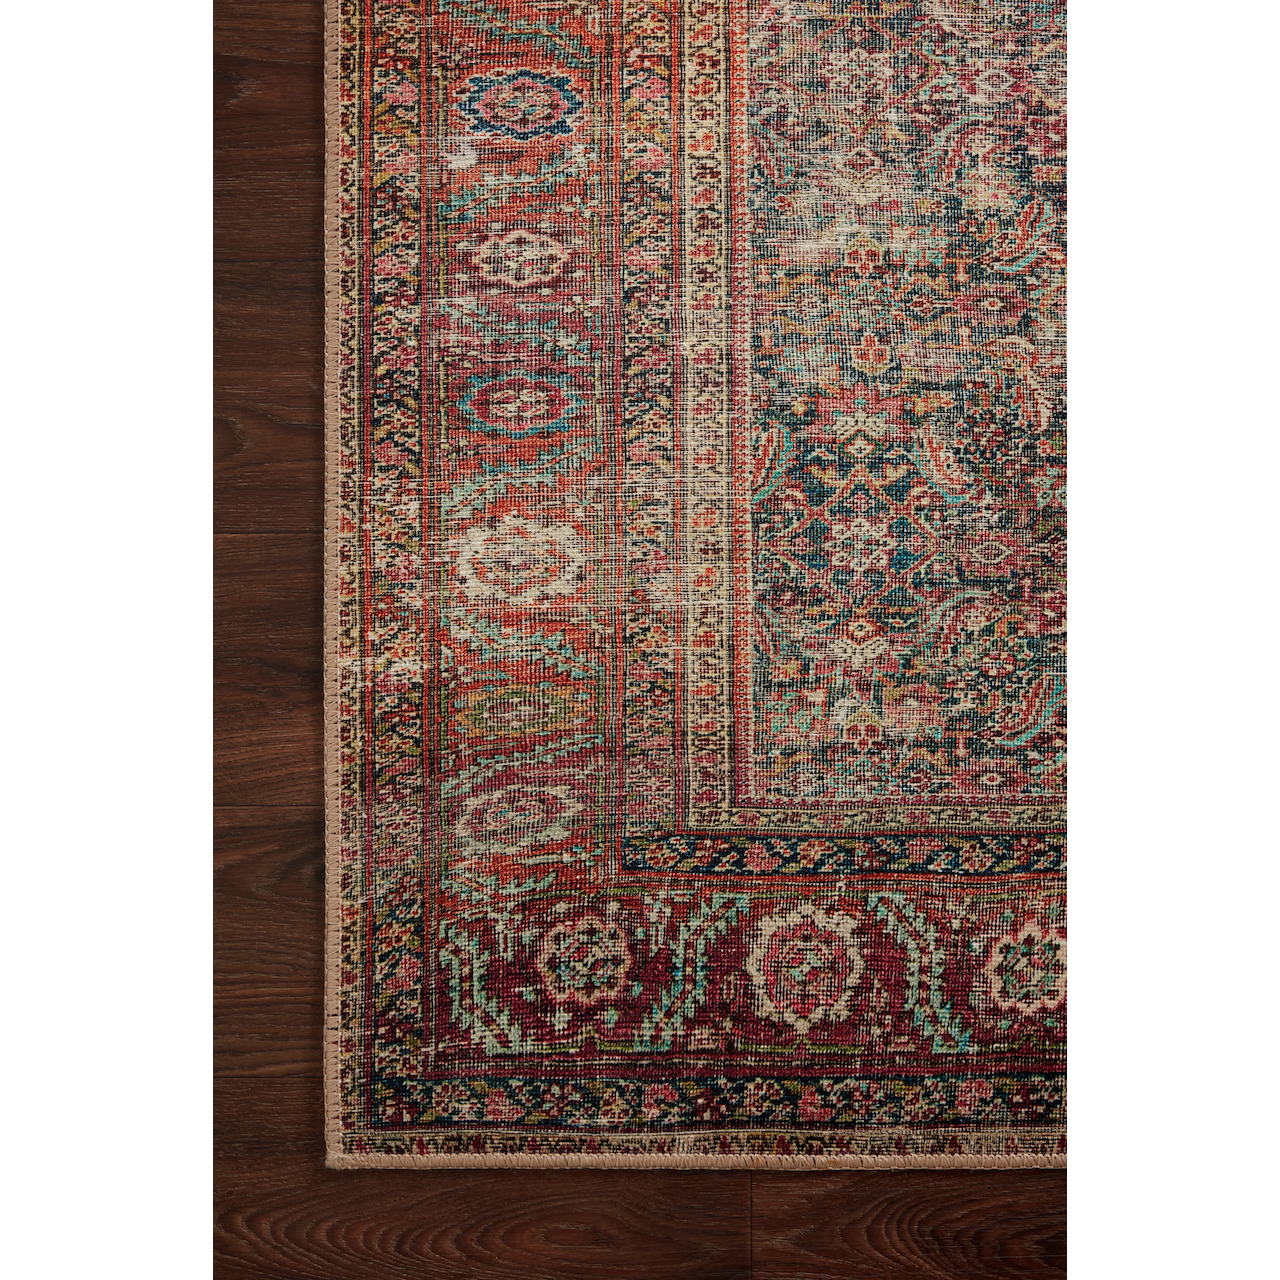 Power-loomed of 100% polyester, the Wynter Onyx / Multi WYN-09 area rug from Loloi showcases a one-of-a-kind vintage or antique area rug look at an affordable price. The rug is ideal for high traffic areas due to the rug's durability making it perfect for living rooms, dining rooms, kitchens, hallways, entryways. Amethyst Home provides interior design, new construction, custom furniture, and rugs for the Austin, Dallas, and Houston metro area.